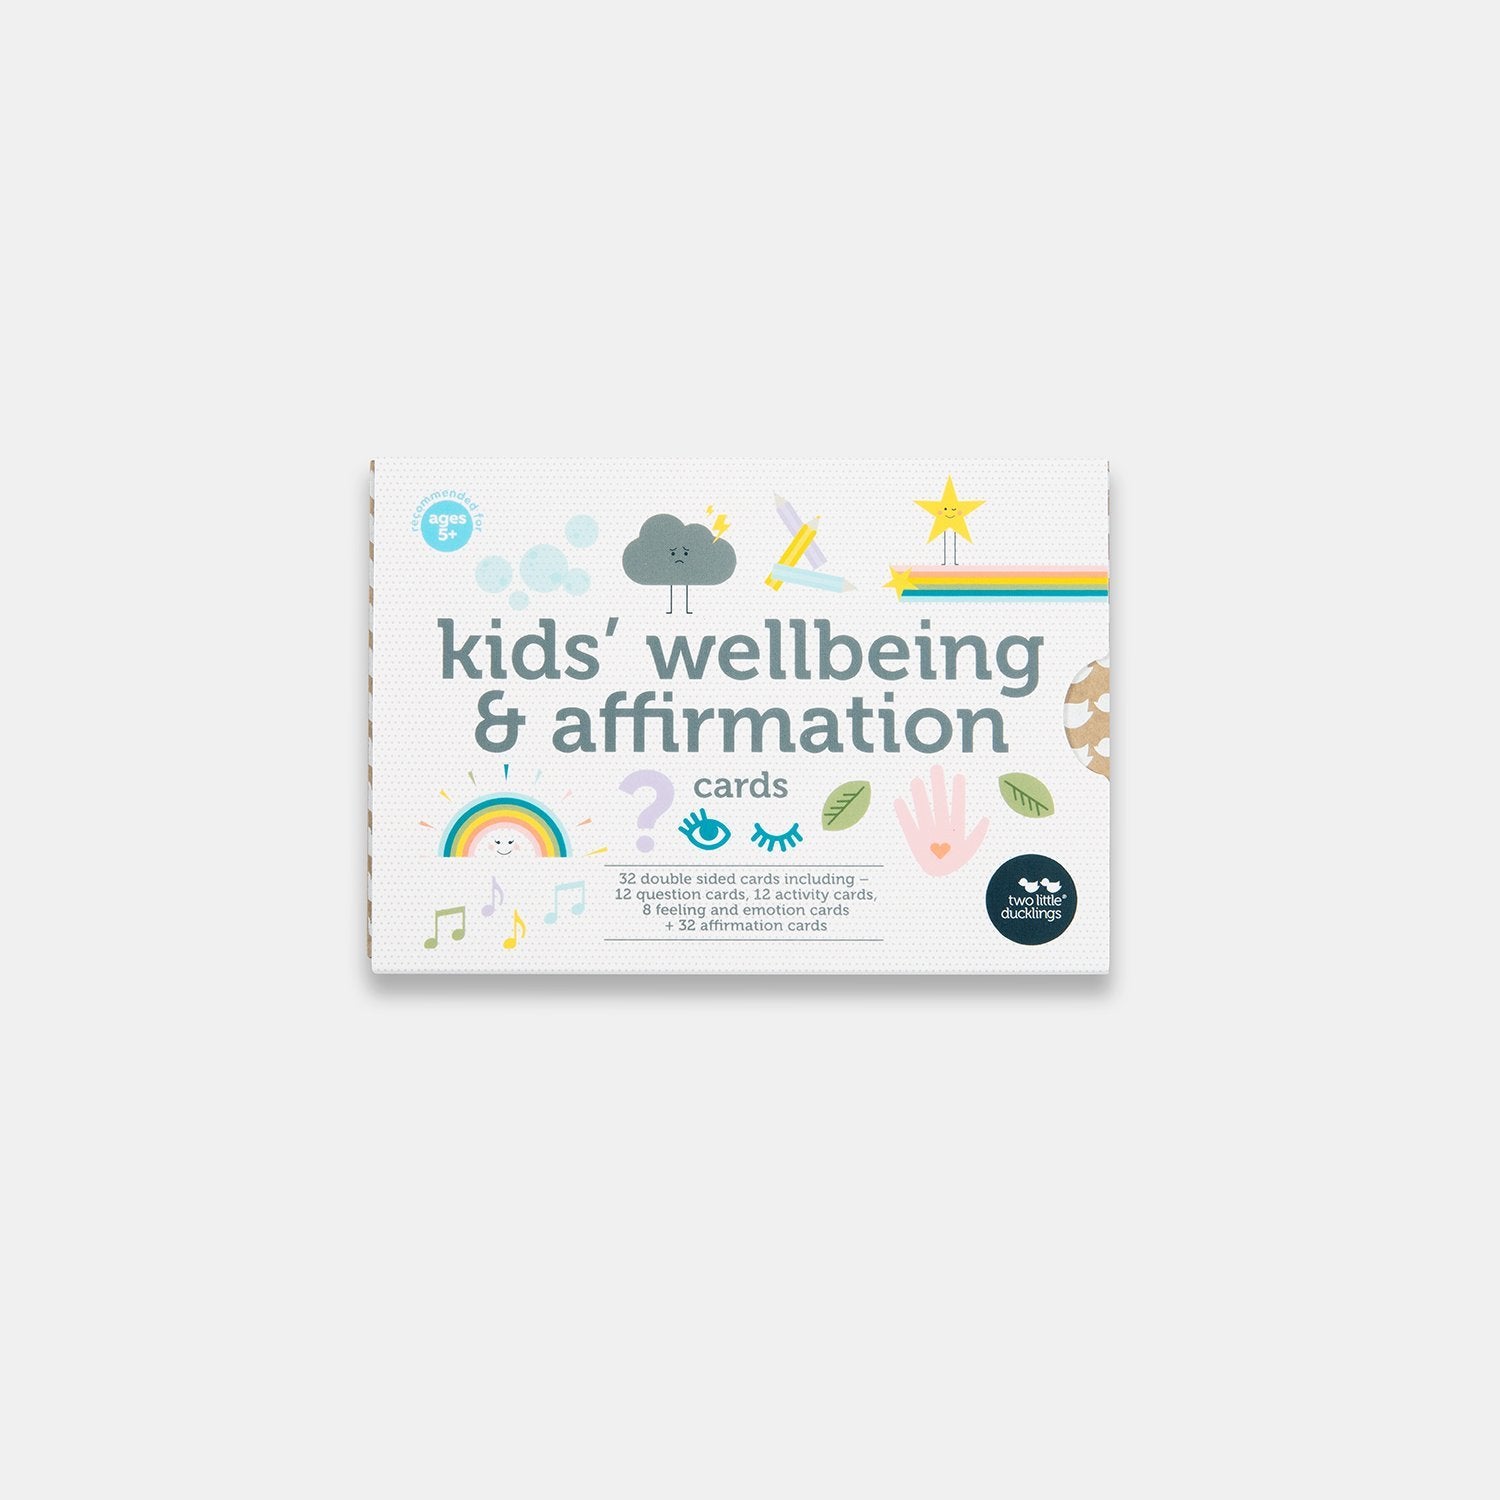 KIDS' WELLBEING & AFFIRMATION CARDS by TWO LITTLE DUCKLINGS - The Playful Collective